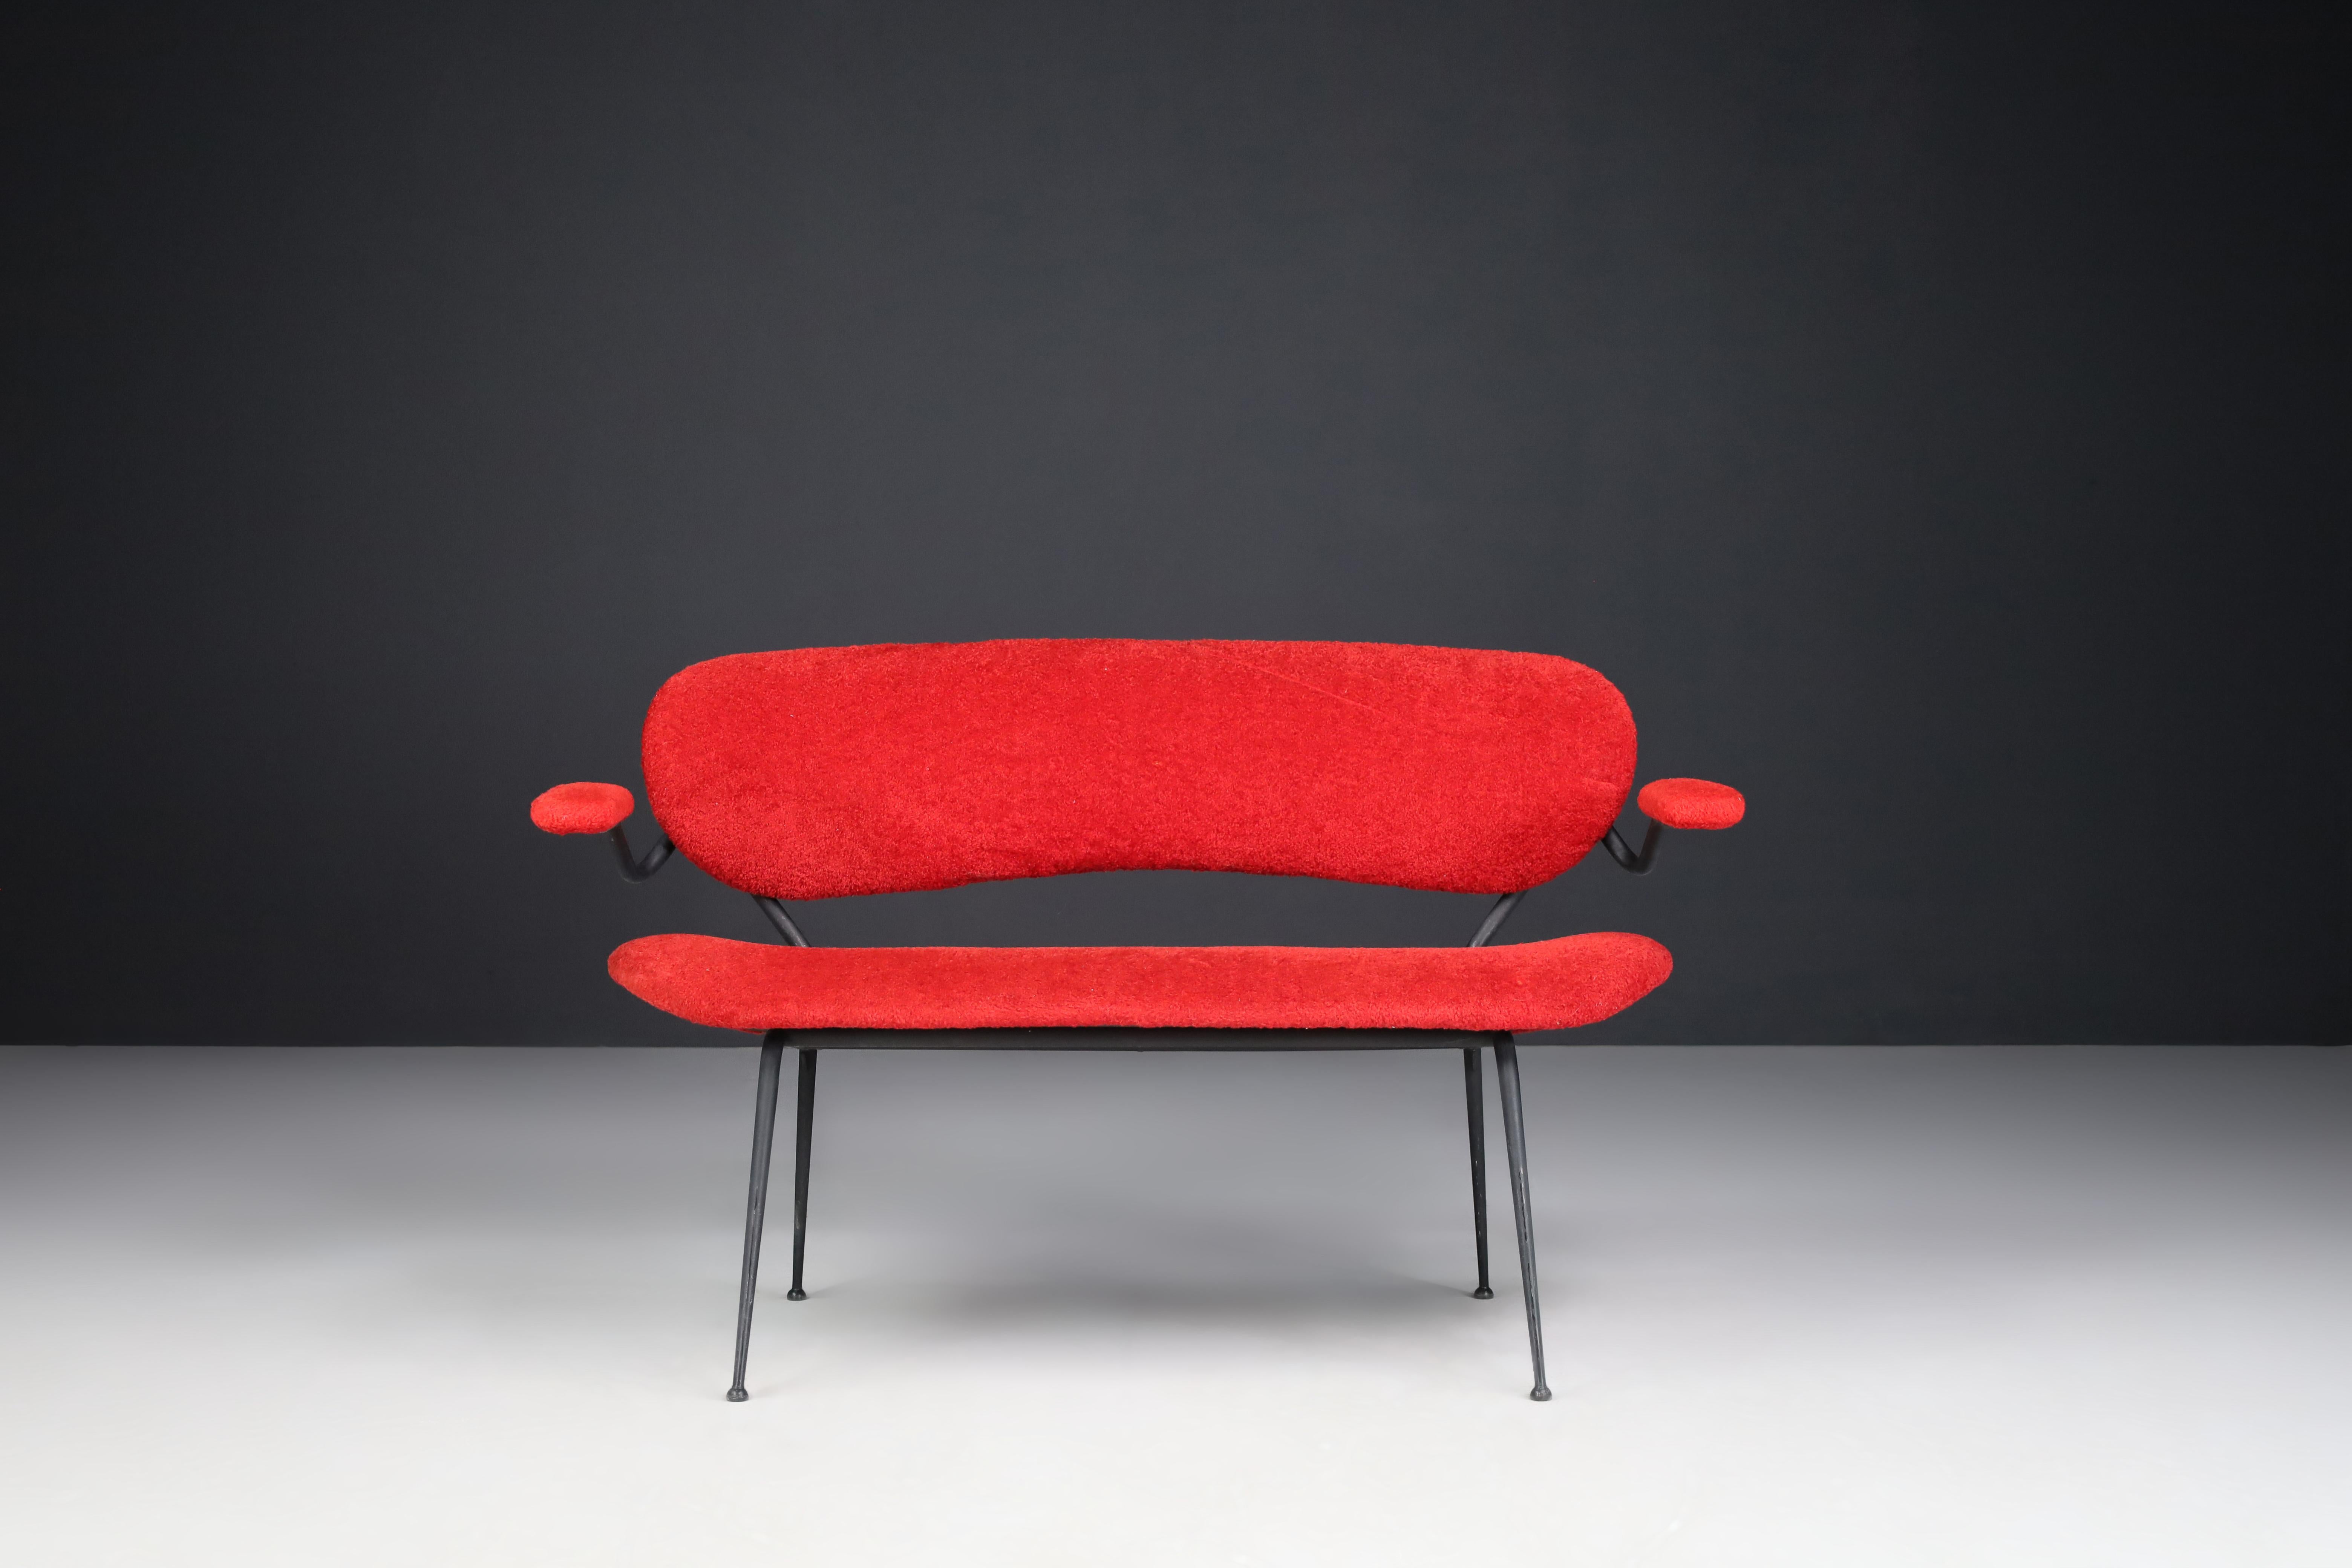 Red Mid-Century Modern sofa/bench by Gastone Rinaldi, Italy 1960s 
 
Gastone Rinaldi designed this beautiful and iconic sofa made in 1954, Italy. The shape of the sofa is sculptural, unique, and elegant. The legs of the sofa are very finely